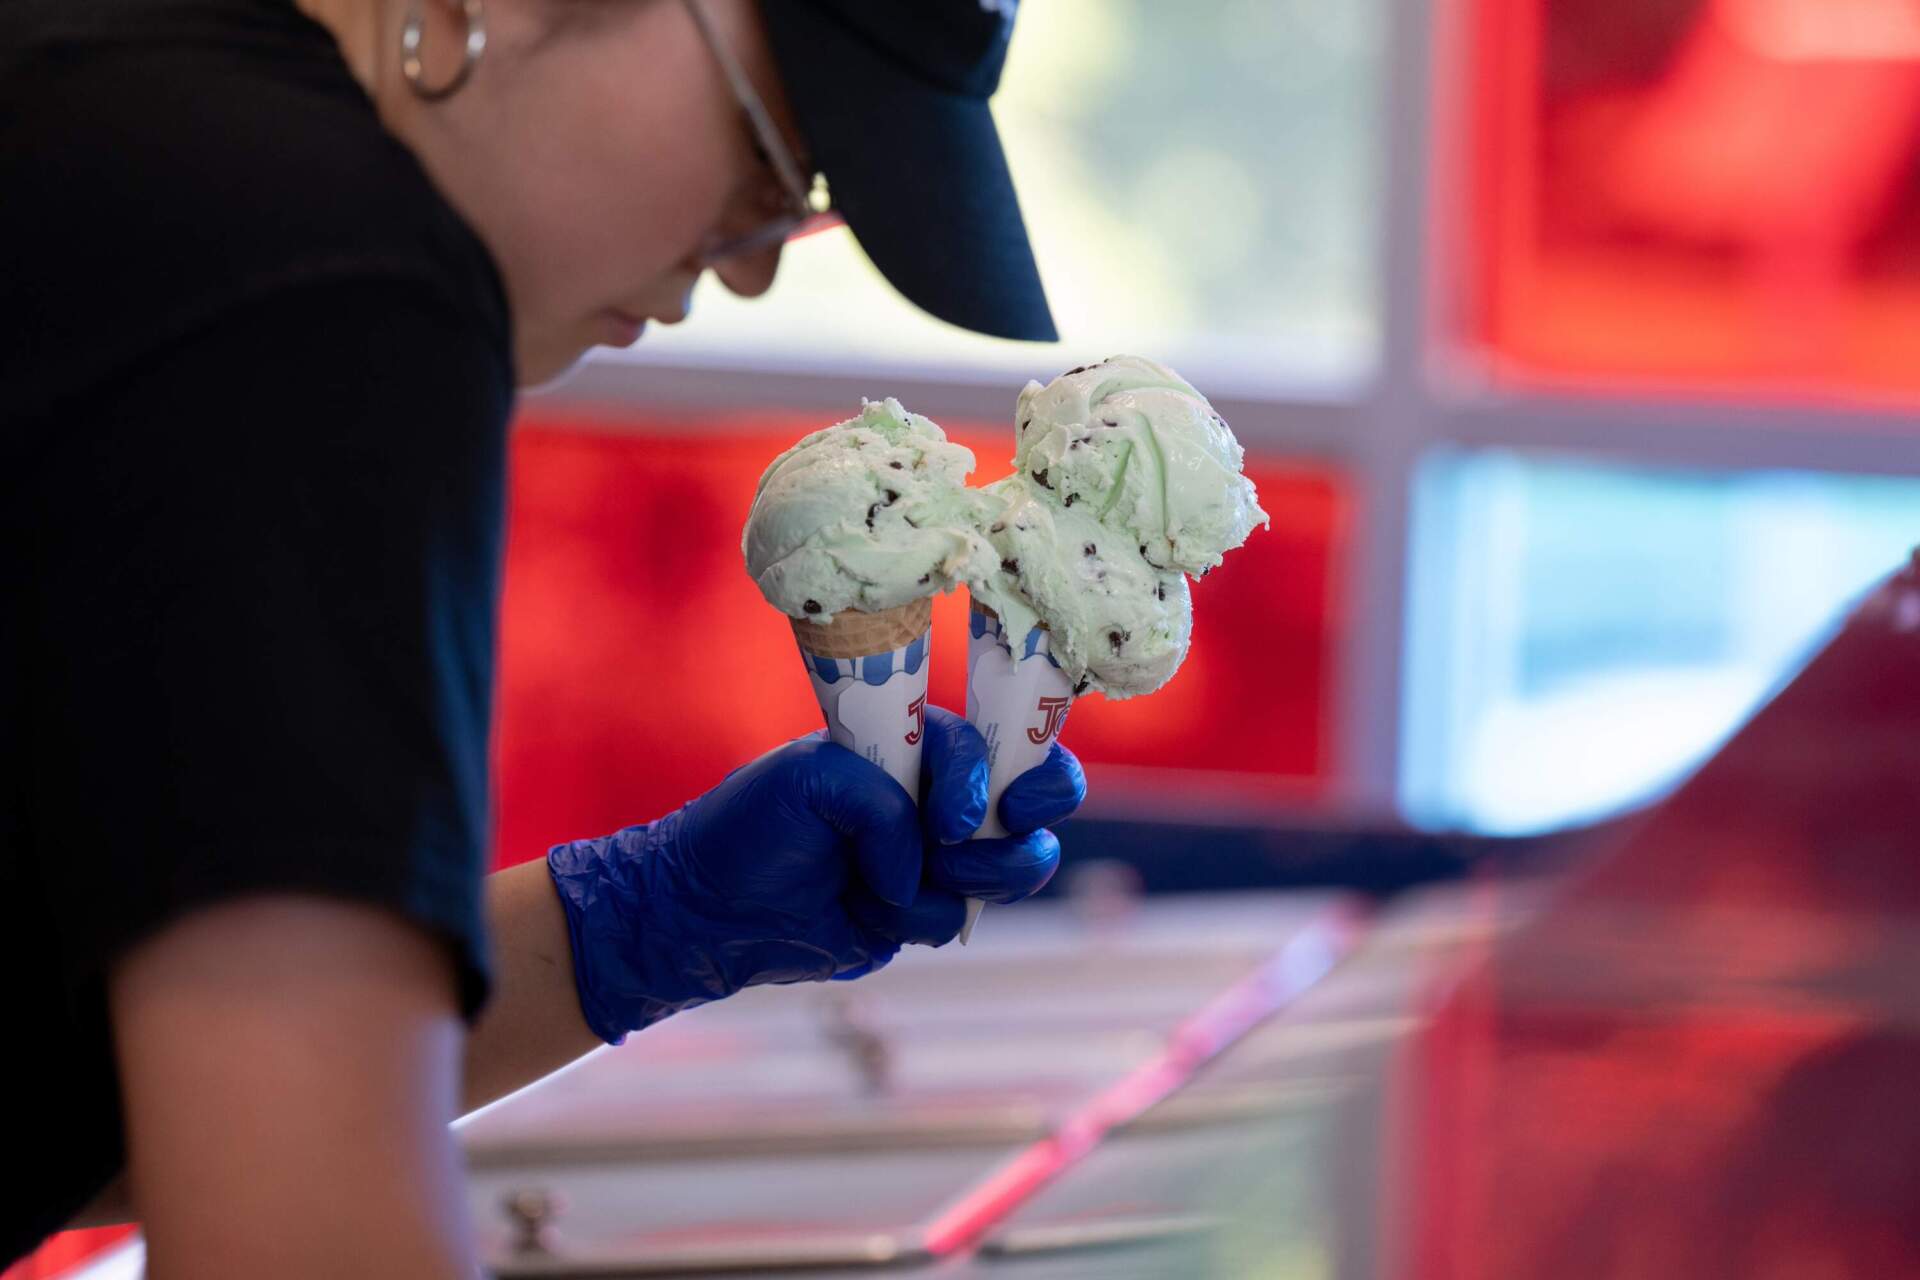 UConn student and UConn Dairy Bar employee Janise Park, 21, prepares an ice cream order for a customer at the UConn Dairy Bar in Storrs, Conn. (Raquel C. Zaldívar/New England News Collaborative)